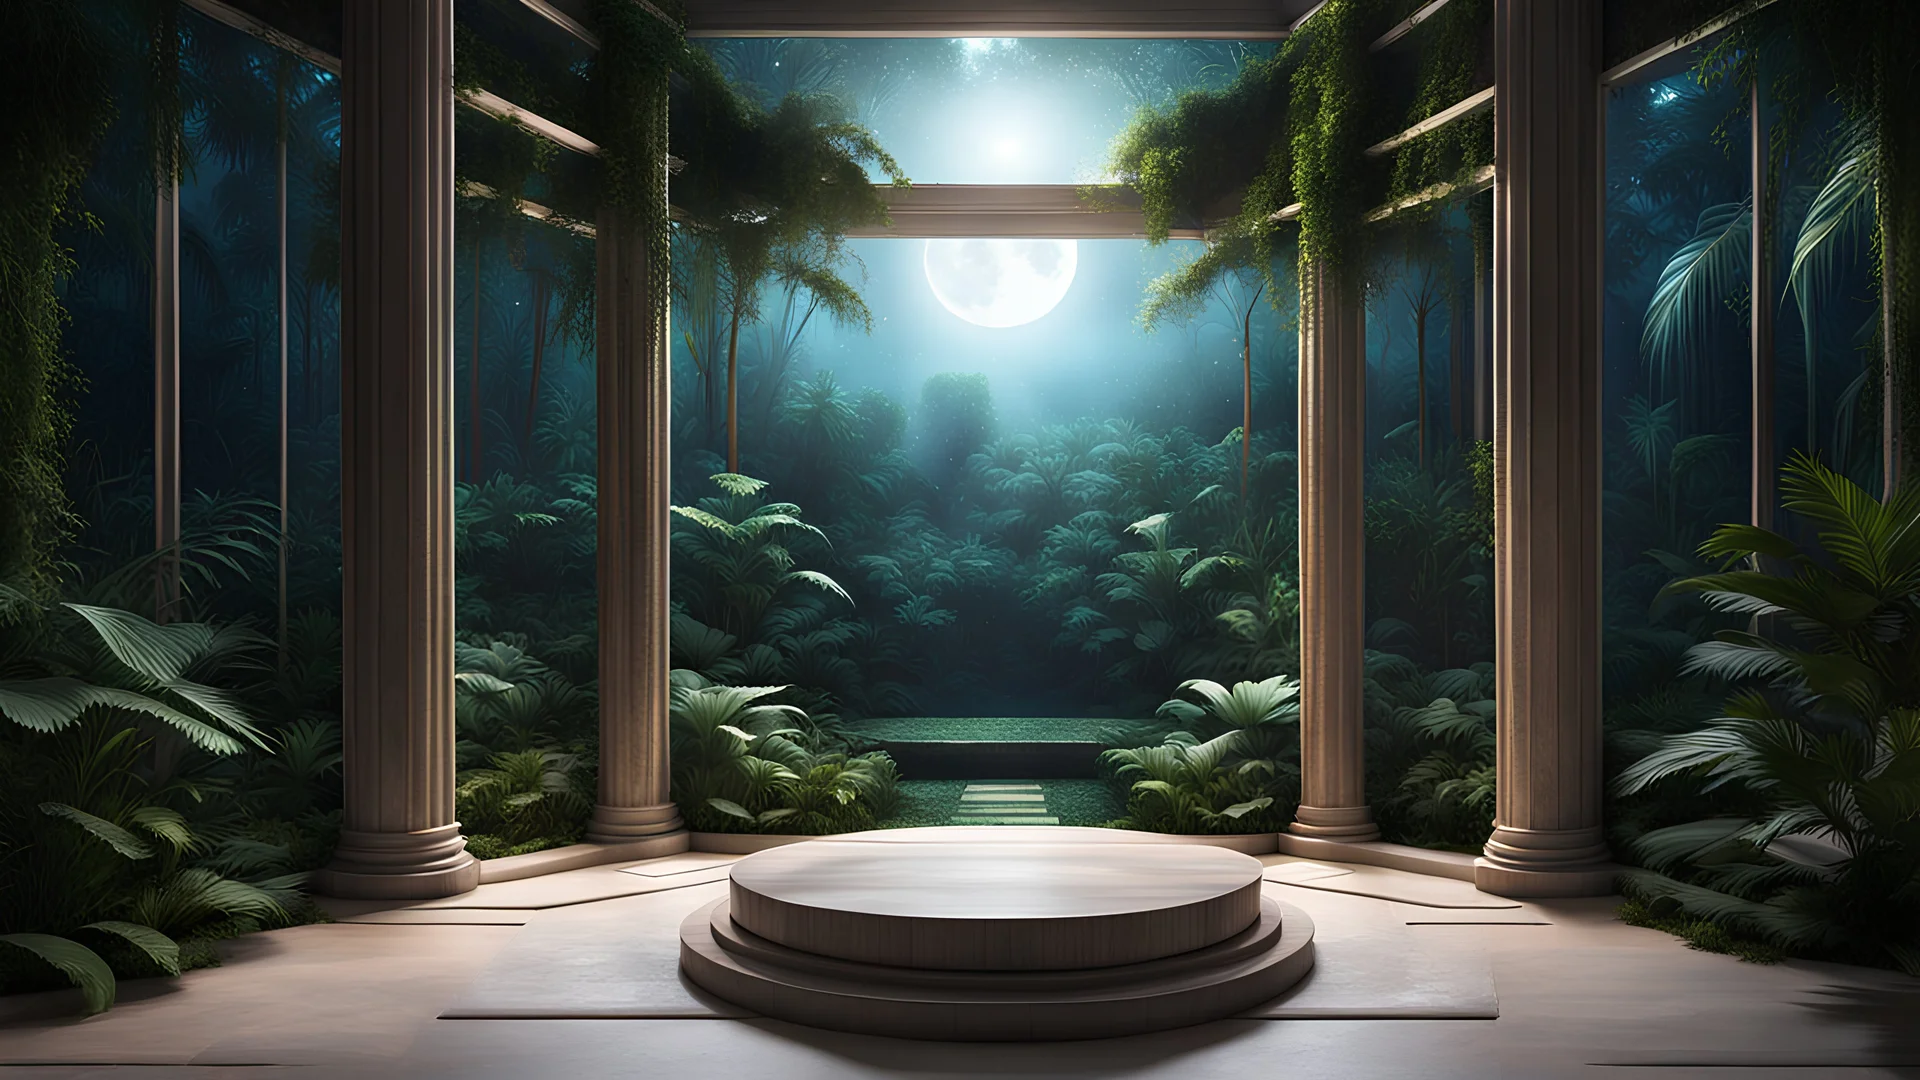 night landscape , meditation podium minimalistic corner. design wood, View from large bay windows throughout from the large bay windows extends through the jungle forest. night landscape. My With dreams. . the palace antic colonnades direct view in the midst in the jungle , galaxy, space, ethereal space, panorama. With the songs of dawn and the sadness of sleep Every leaf - that trembles in the embrace of the black My With